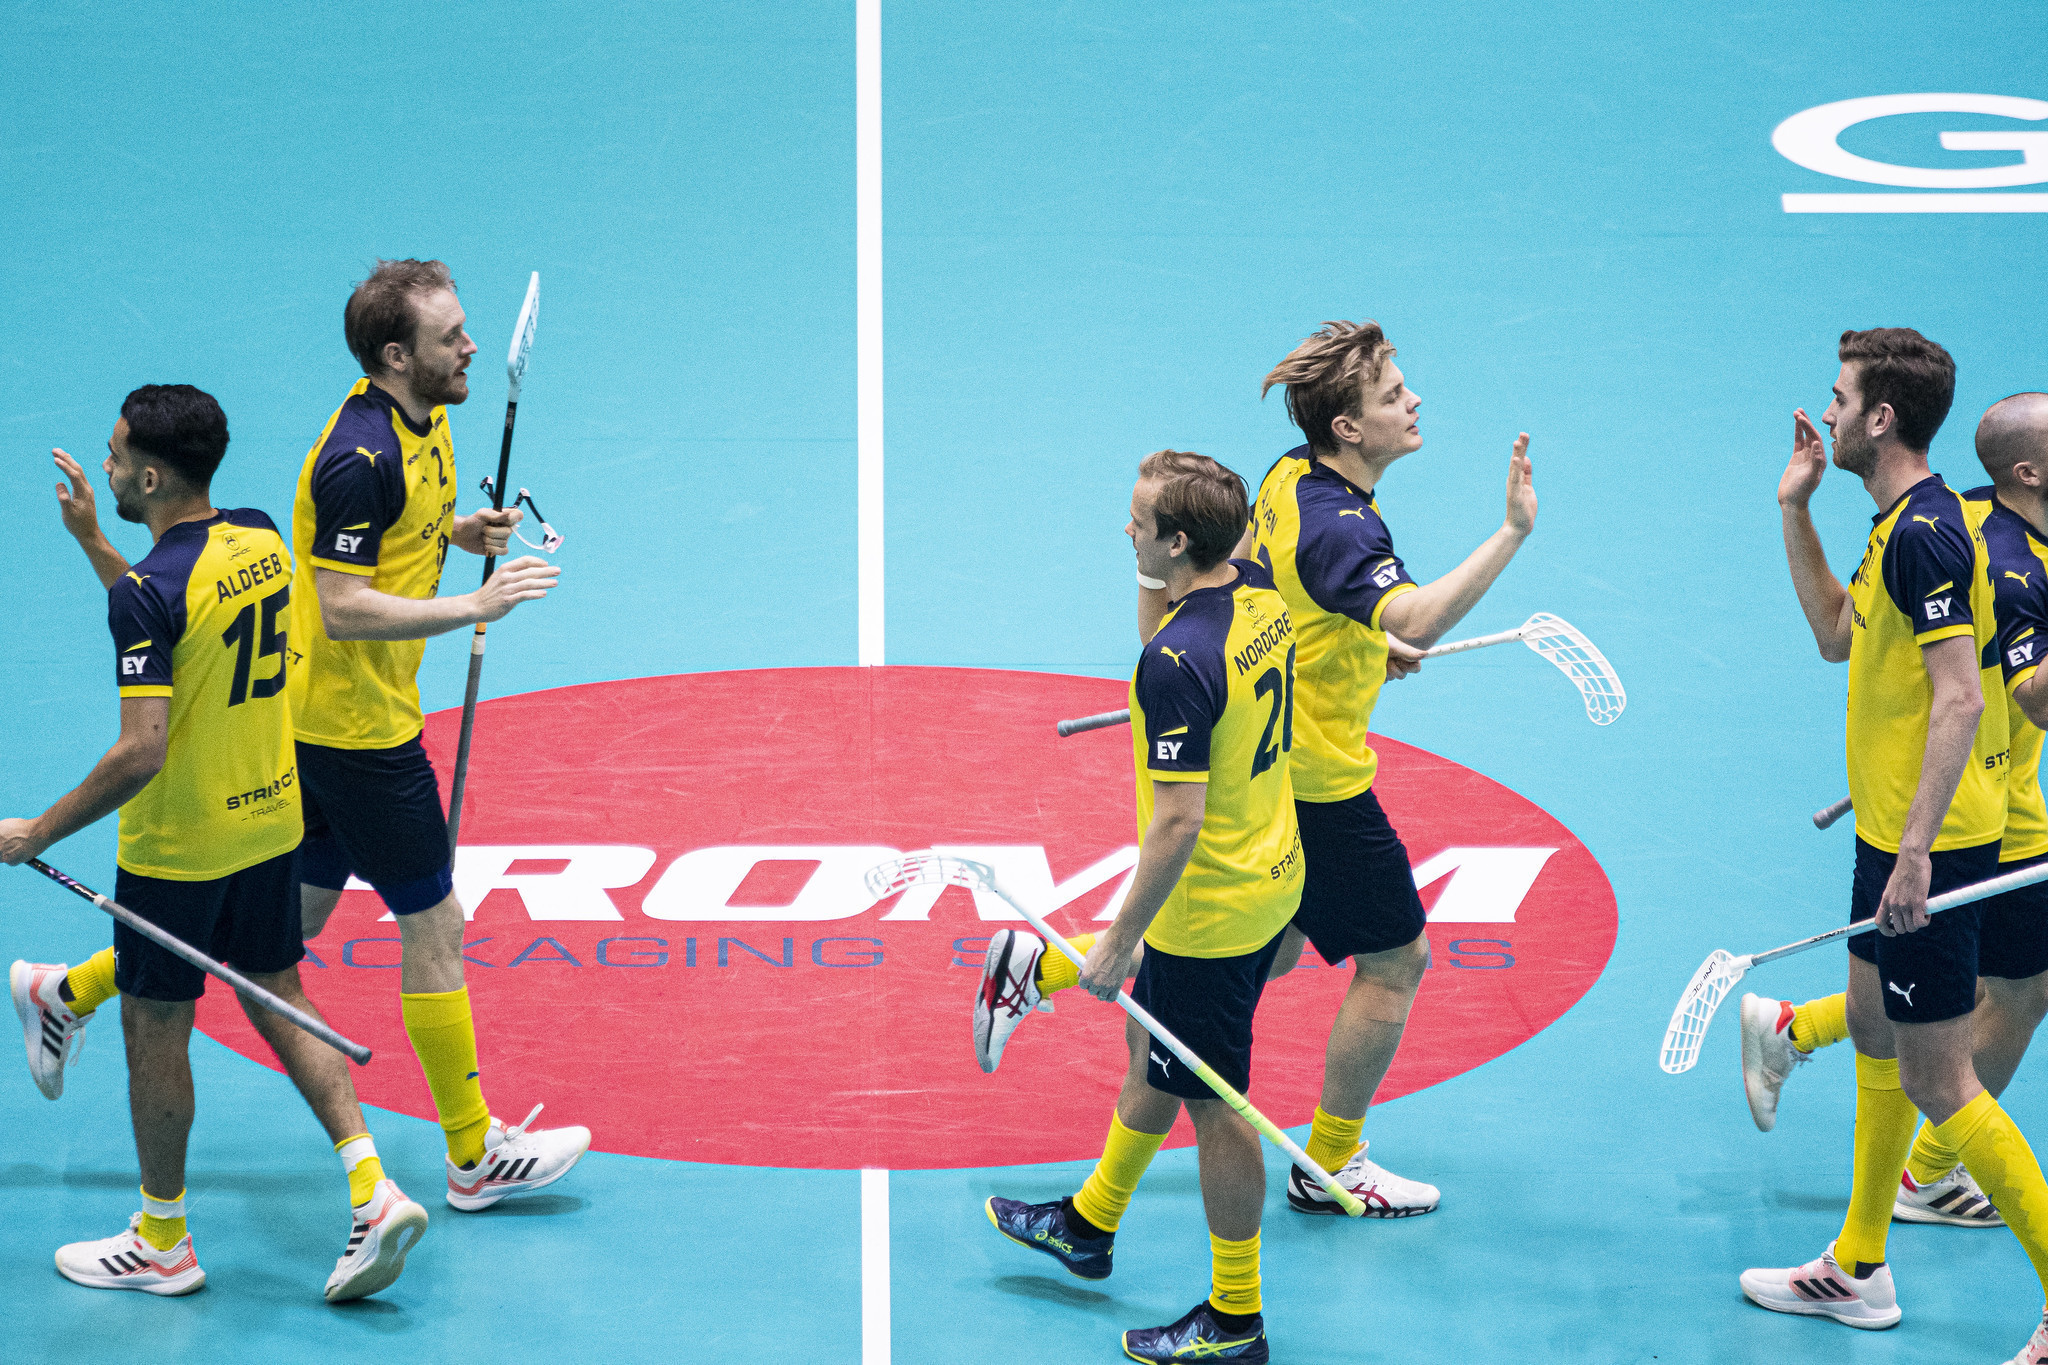 Sweden hoping to defend title at 2022 Men's World Floorball Championships 